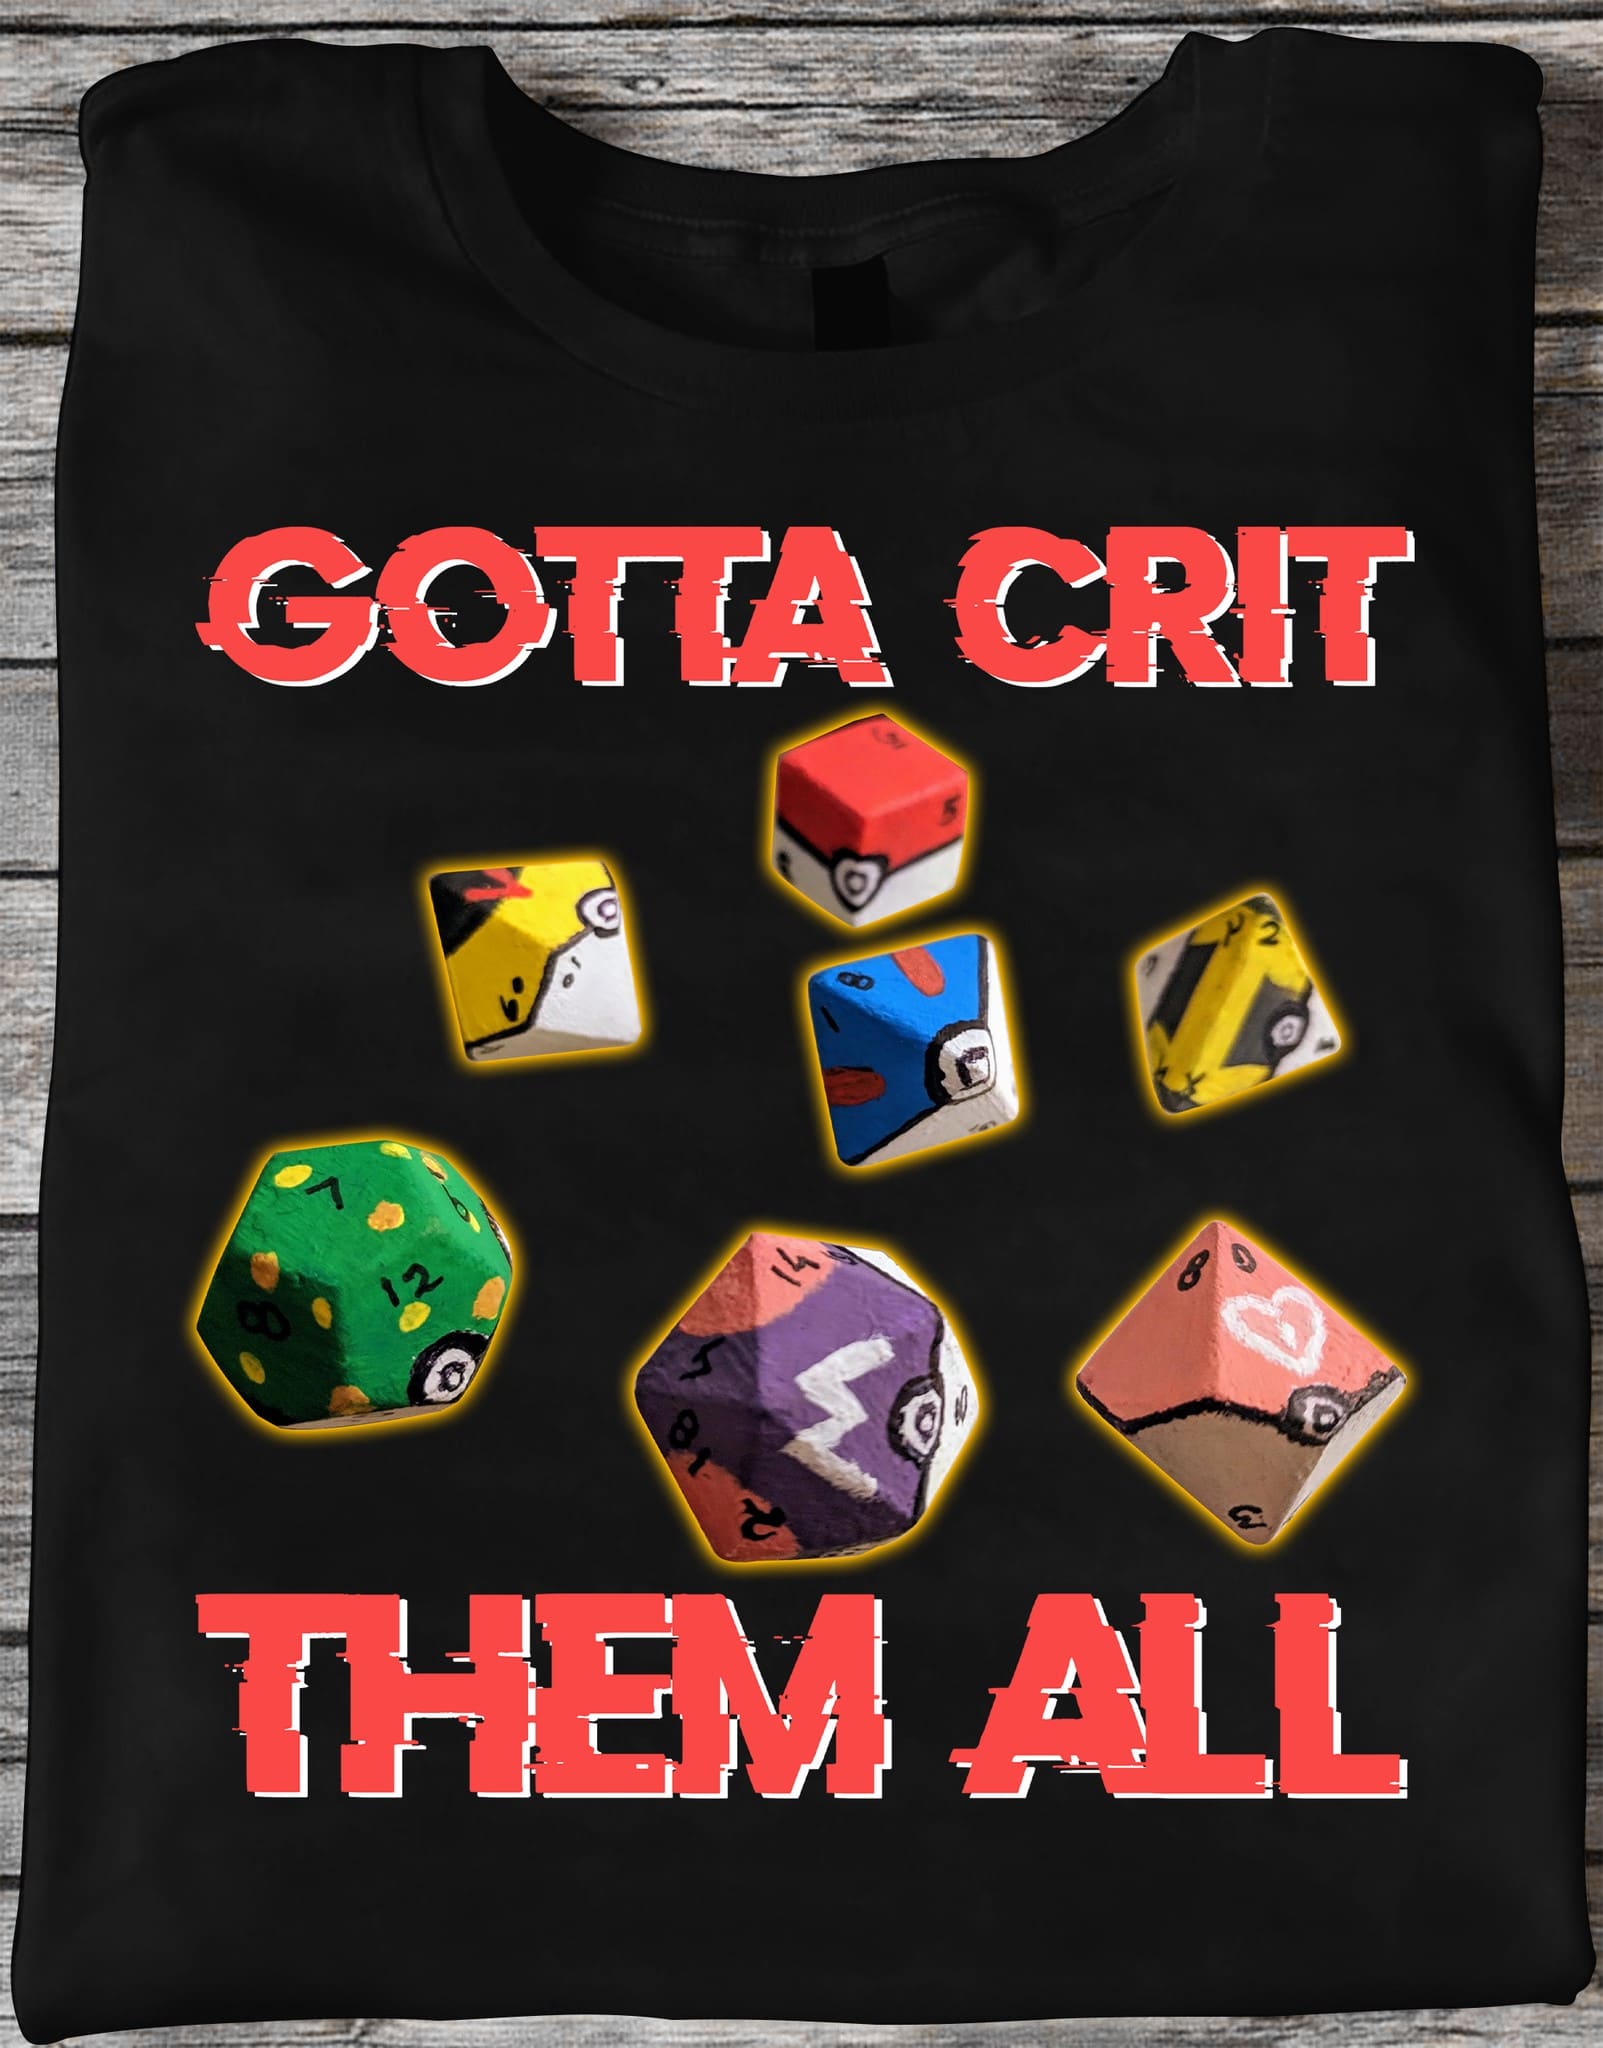 Gotta crit them all - Dungeons and Dragons dice, Pokeball graphic T-shirt